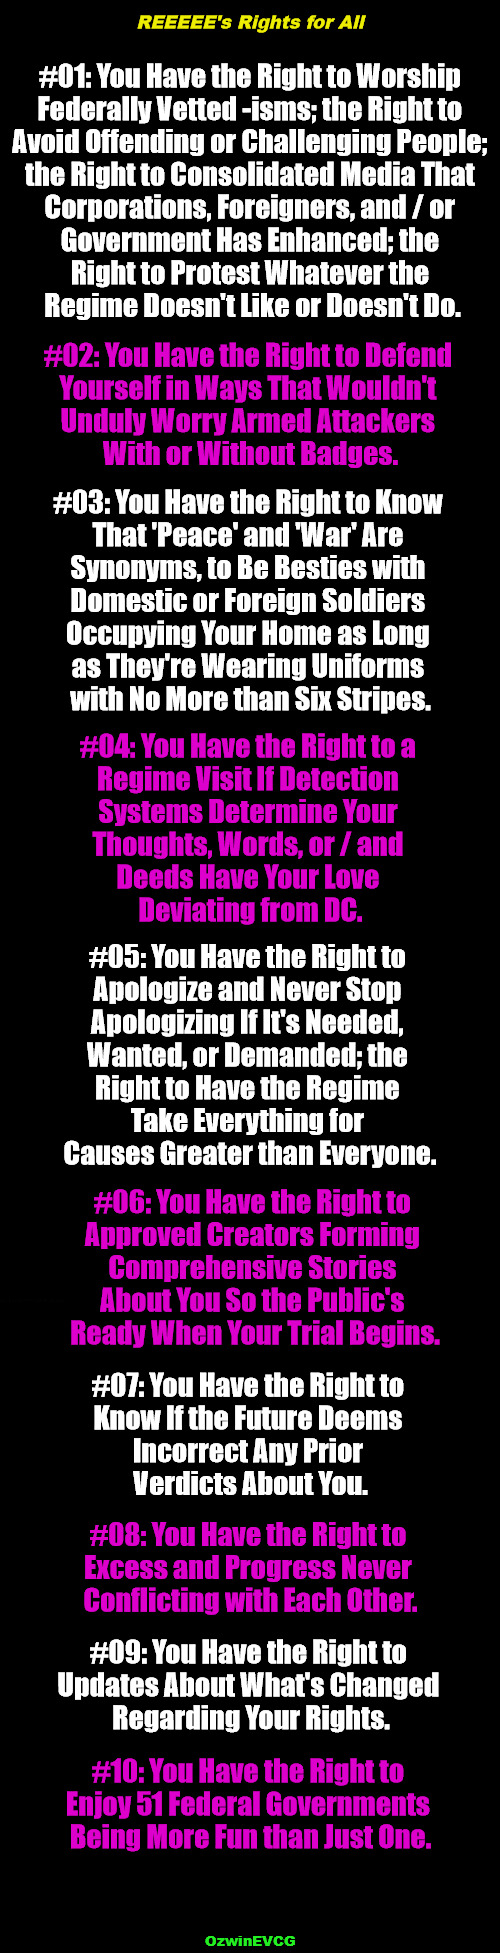 REEEEE's Rights for All | REEEEE's Rights for All; #01: You Have the Right to Worship 

Federally Vetted -isms; the Right to 

Avoid Offending or Challenging People; 

the Right to Consolidated Media That 

Corporations, Foreigners, and / or 

Government Has Enhanced; the 

Right to Protest Whatever the 

Regime Doesn't Like or Doesn't Do. #02: You Have the Right to Defend 

Yourself in Ways That Wouldn't 

Unduly Worry Armed Attackers 

With or Without Badges. #03: You Have the Right to Know 

That 'Peace' and 'War' Are 

Synonyms, to Be Besties with 

Domestic or Foreign Soldiers 

Occupying Your Home as Long 

as They're Wearing Uniforms 

with No More than Six Stripes. #04: You Have the Right to a 

Regime Visit If Detection 

Systems Determine Your 

Thoughts, Words, or / and 

Deeds Have Your Love 

Deviating from DC. #05: You Have the Right to 

Apologize and Never Stop 

Apologizing If It's Needed, 

Wanted, or Demanded; the 

Right to Have the Regime 

Take Everything for 

Causes Greater than Everyone. #06: You Have the Right to 

Approved Creators Forming 

Comprehensive Stories 

About You So the Public's 

Ready When Your Trial Begins. #07: You Have the Right to 

Know If the Future Deems 

Incorrect Any Prior 

Verdicts About You. #08: You Have the Right to 

Excess and Progress Never 

Conflicting with Each Other. #09: You Have the Right to 

Updates About What's Changed 

Regarding Your Rights. #10: You Have the Right to 

Enjoy 51 Federal Governments 

Being More Fun than Just One. OzwinEVCG | image tagged in clown world,bill of rights,world occupied,reeeee,occupied usa,crazy times | made w/ Imgflip meme maker